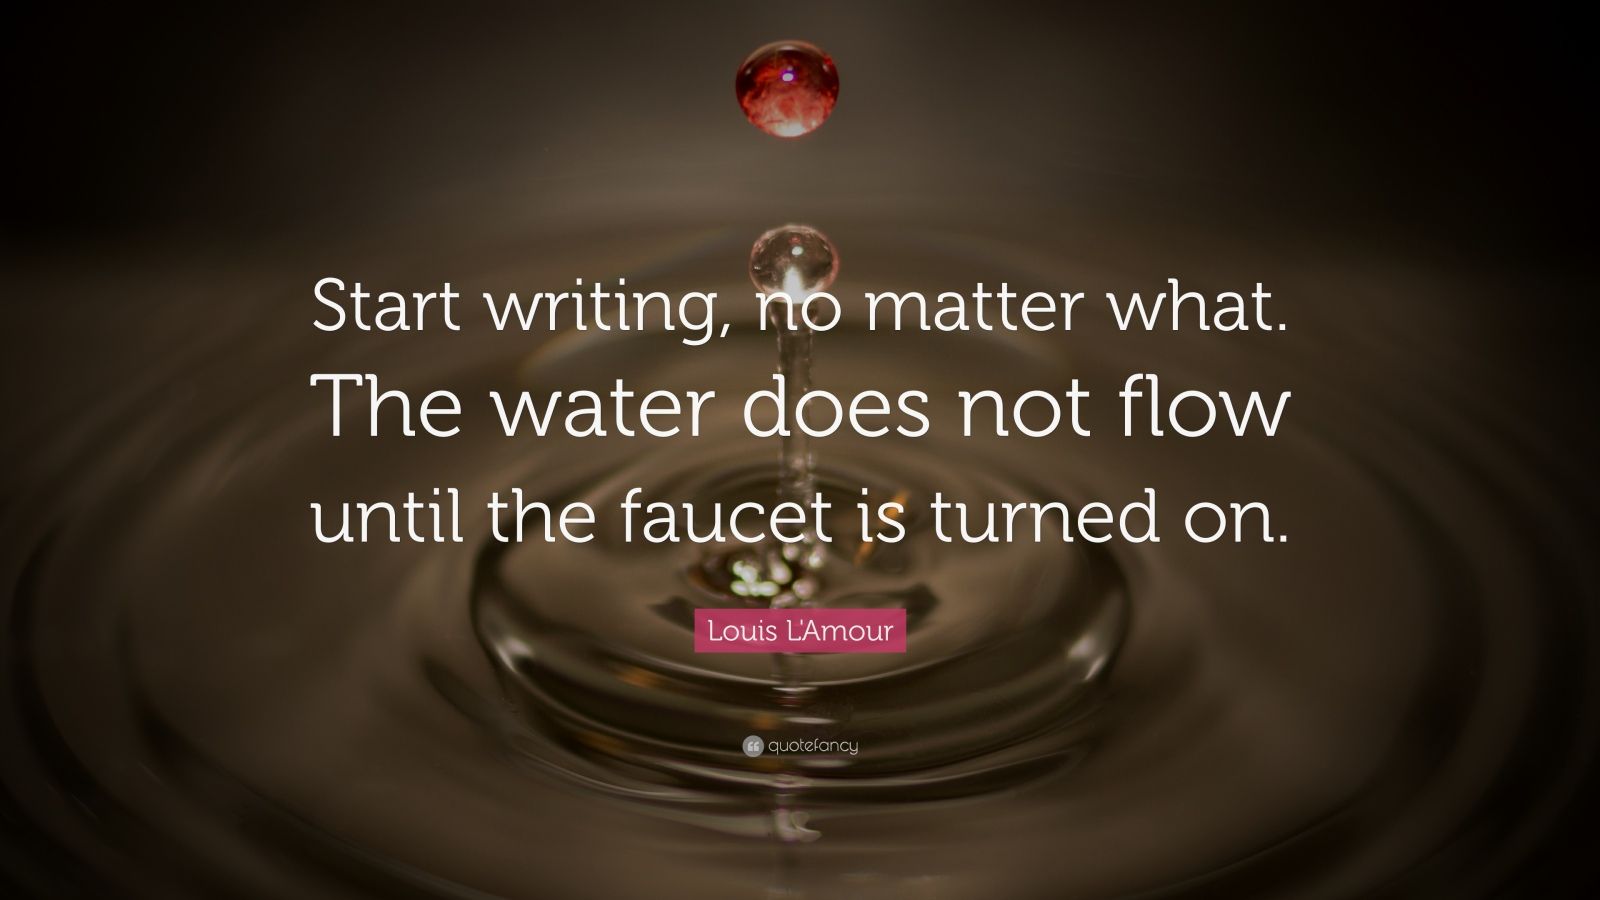 Louis L&#39;Amour Quote: “Start writing, no matter what. The water does not flow until the faucet is ...